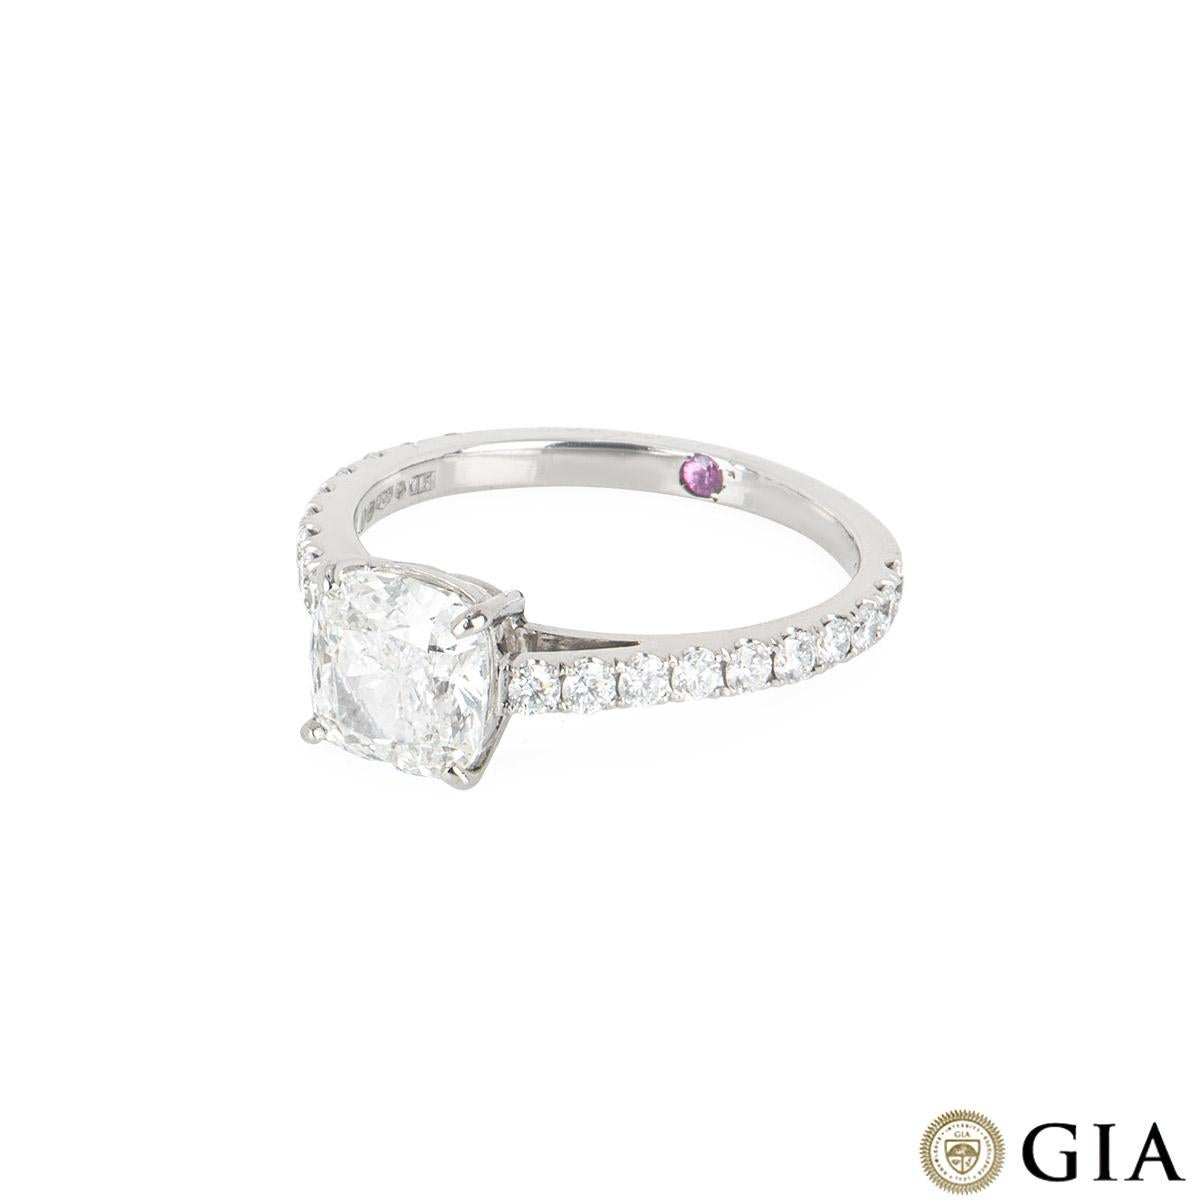 GIA Certified Platinum Cushion Cut Diamond Ring 1.55ct G/VVS1 In Excellent Condition For Sale In London, GB